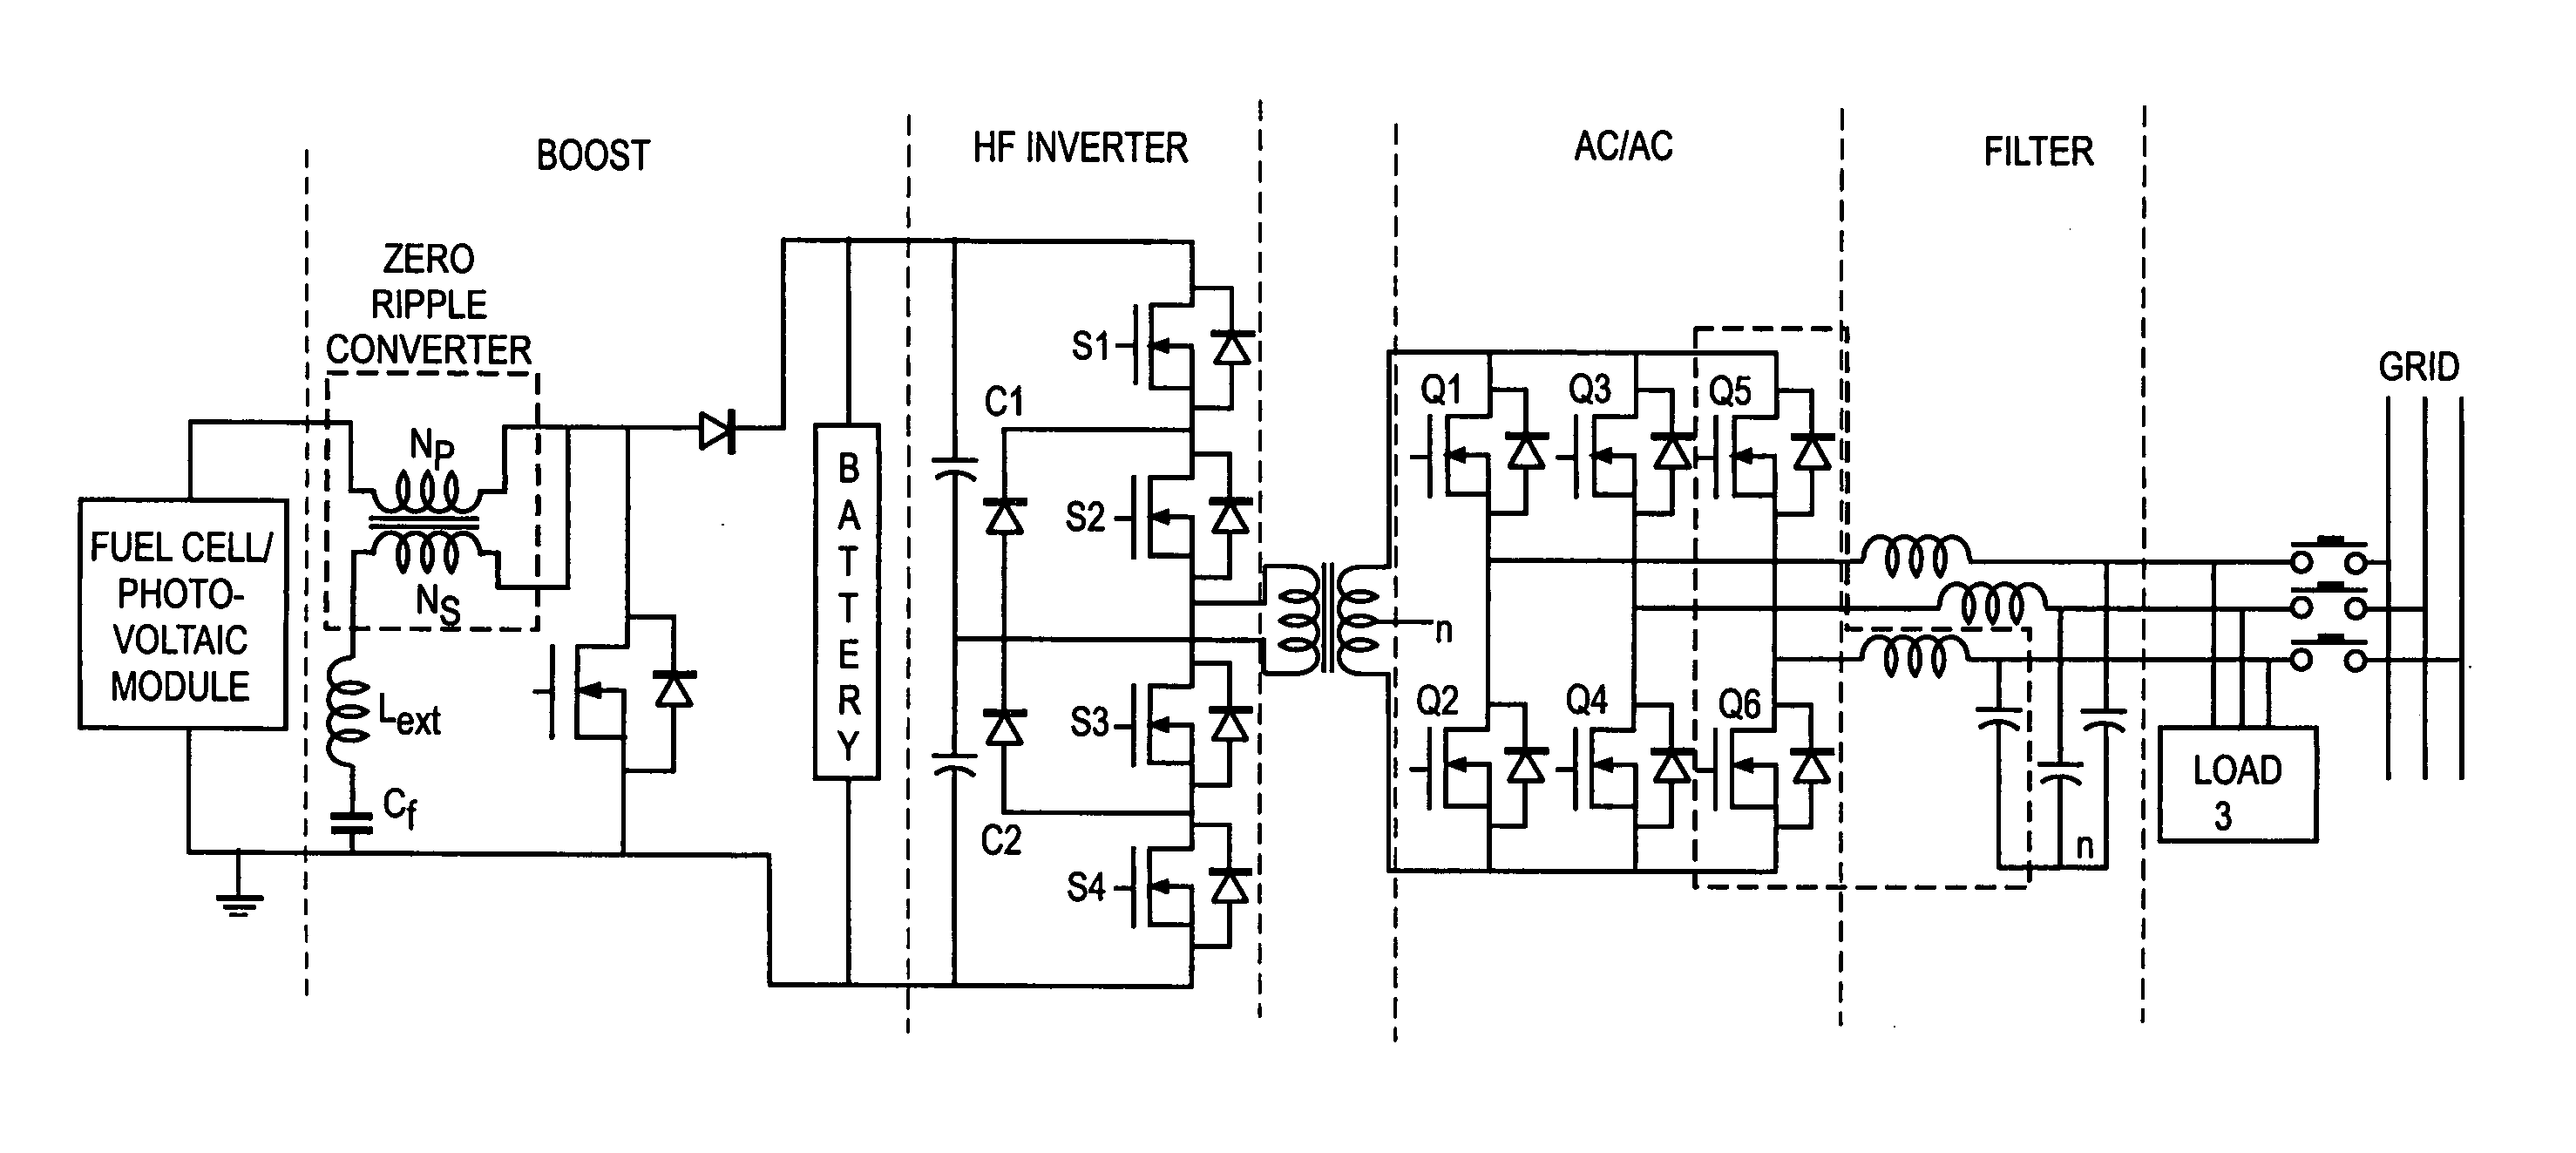 Novel efficient and reliable DC/AC converter for fuel cell power conditioning